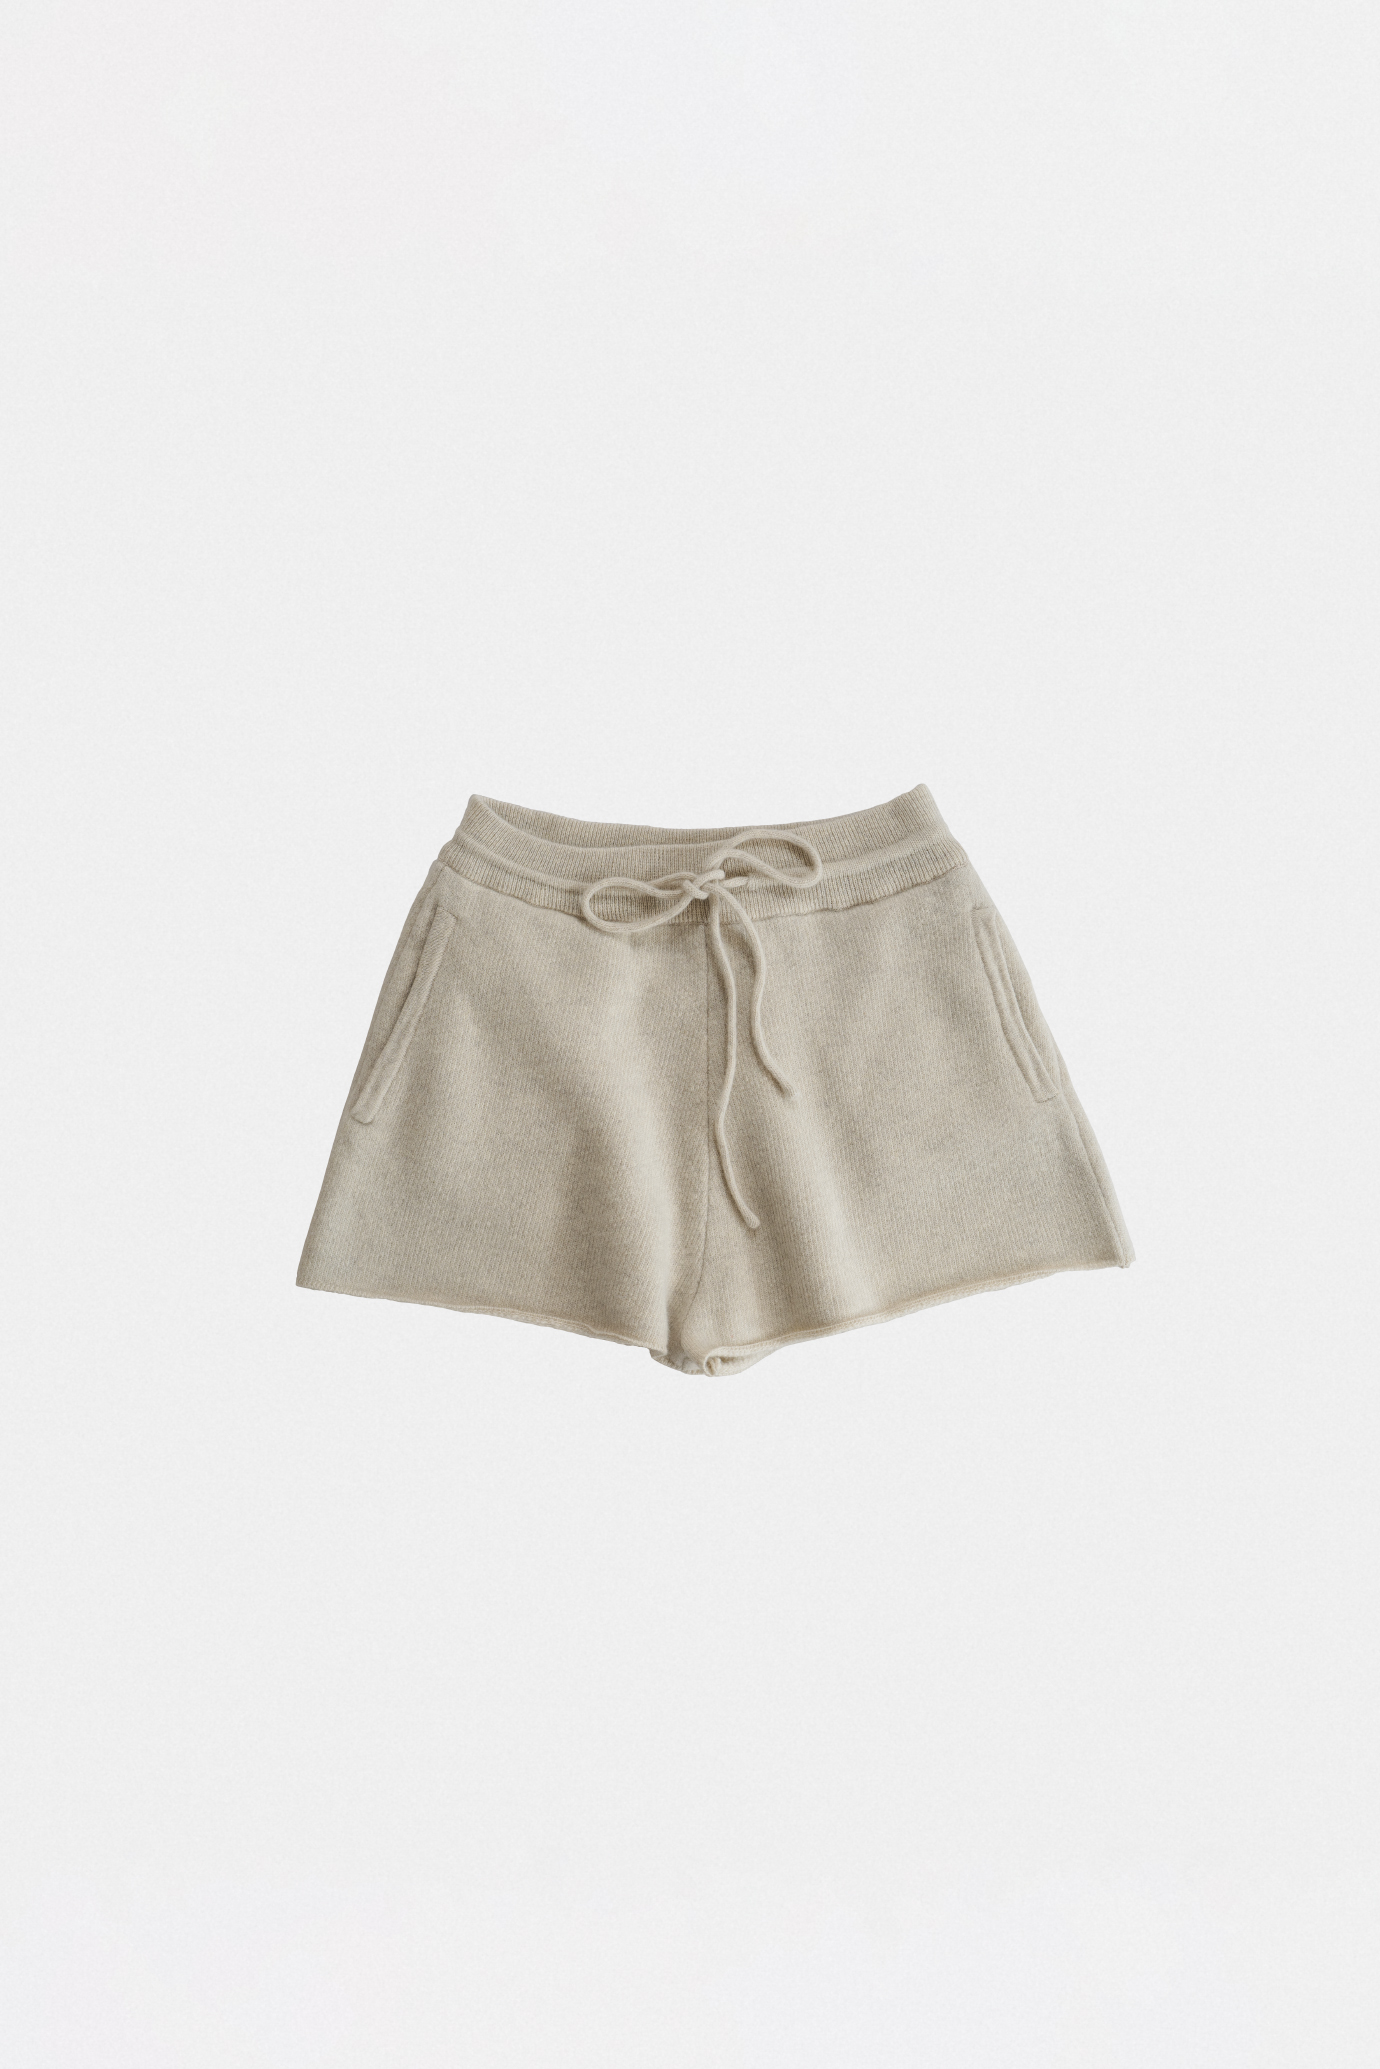 19256_Wool and cashmere shorts